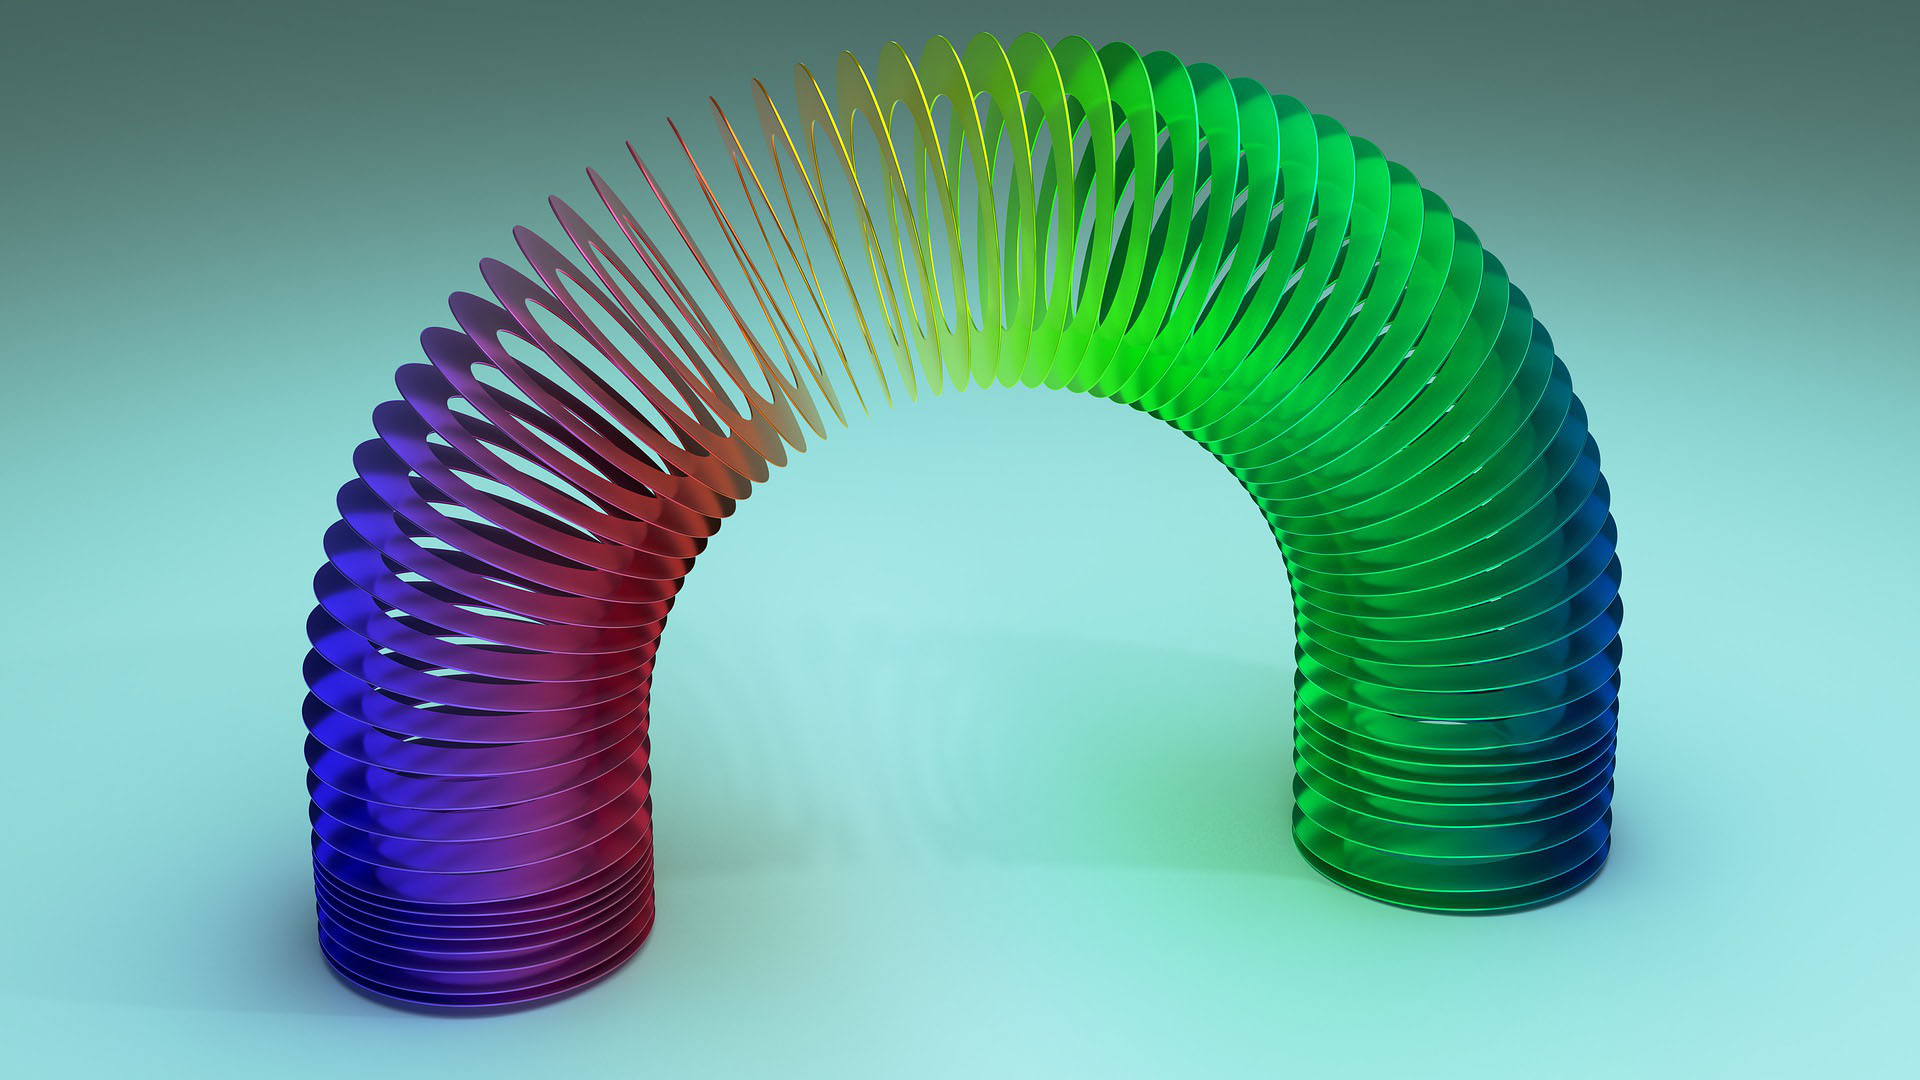 Everyone knows it's Slinky: 75 years of a classic toy - Marketplace